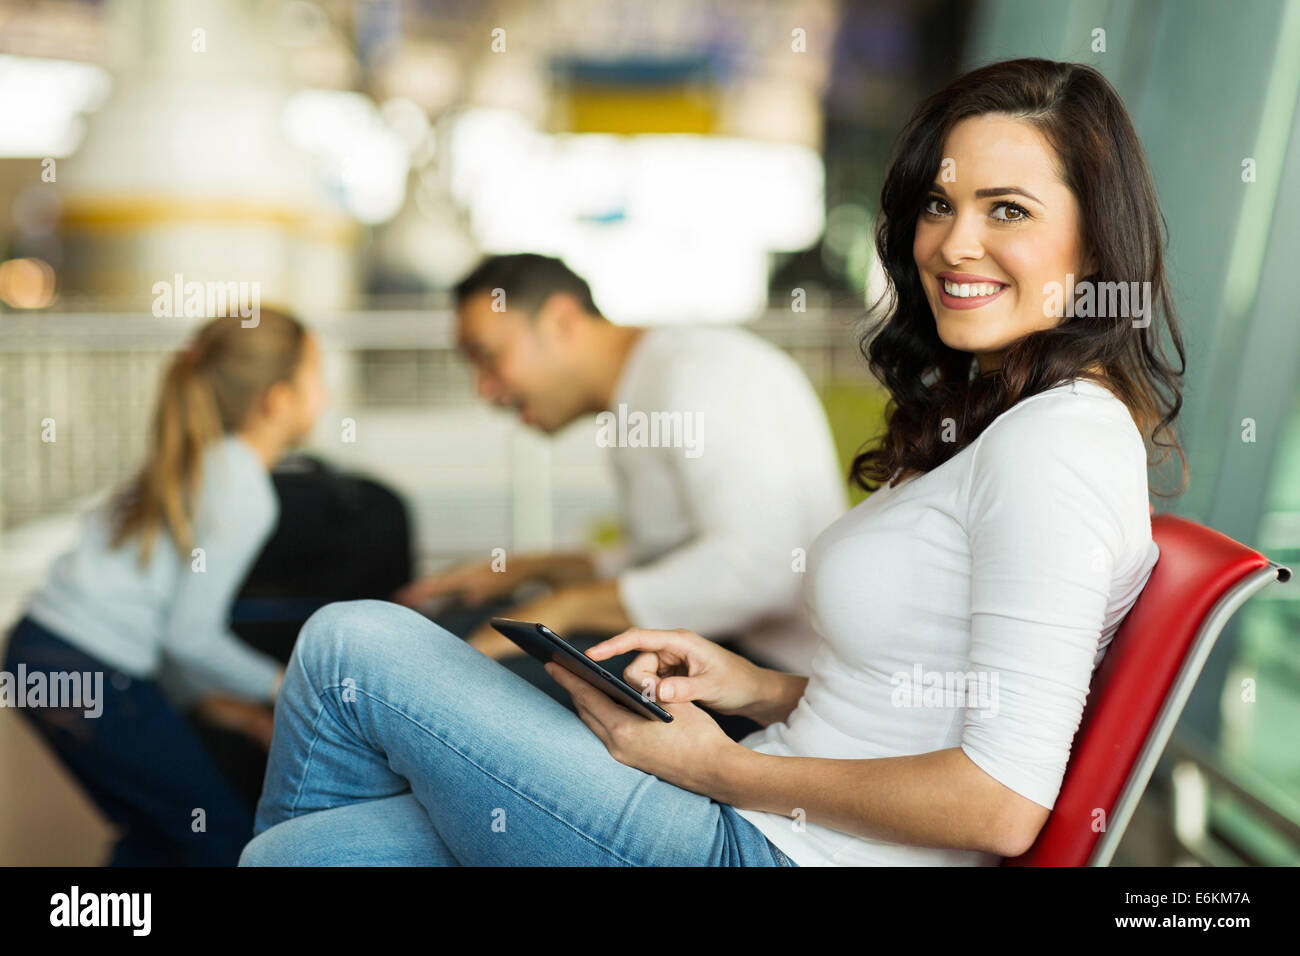 pretty woman holding tablet computer relaxing at airport while her husband playing with kid Stock Photo